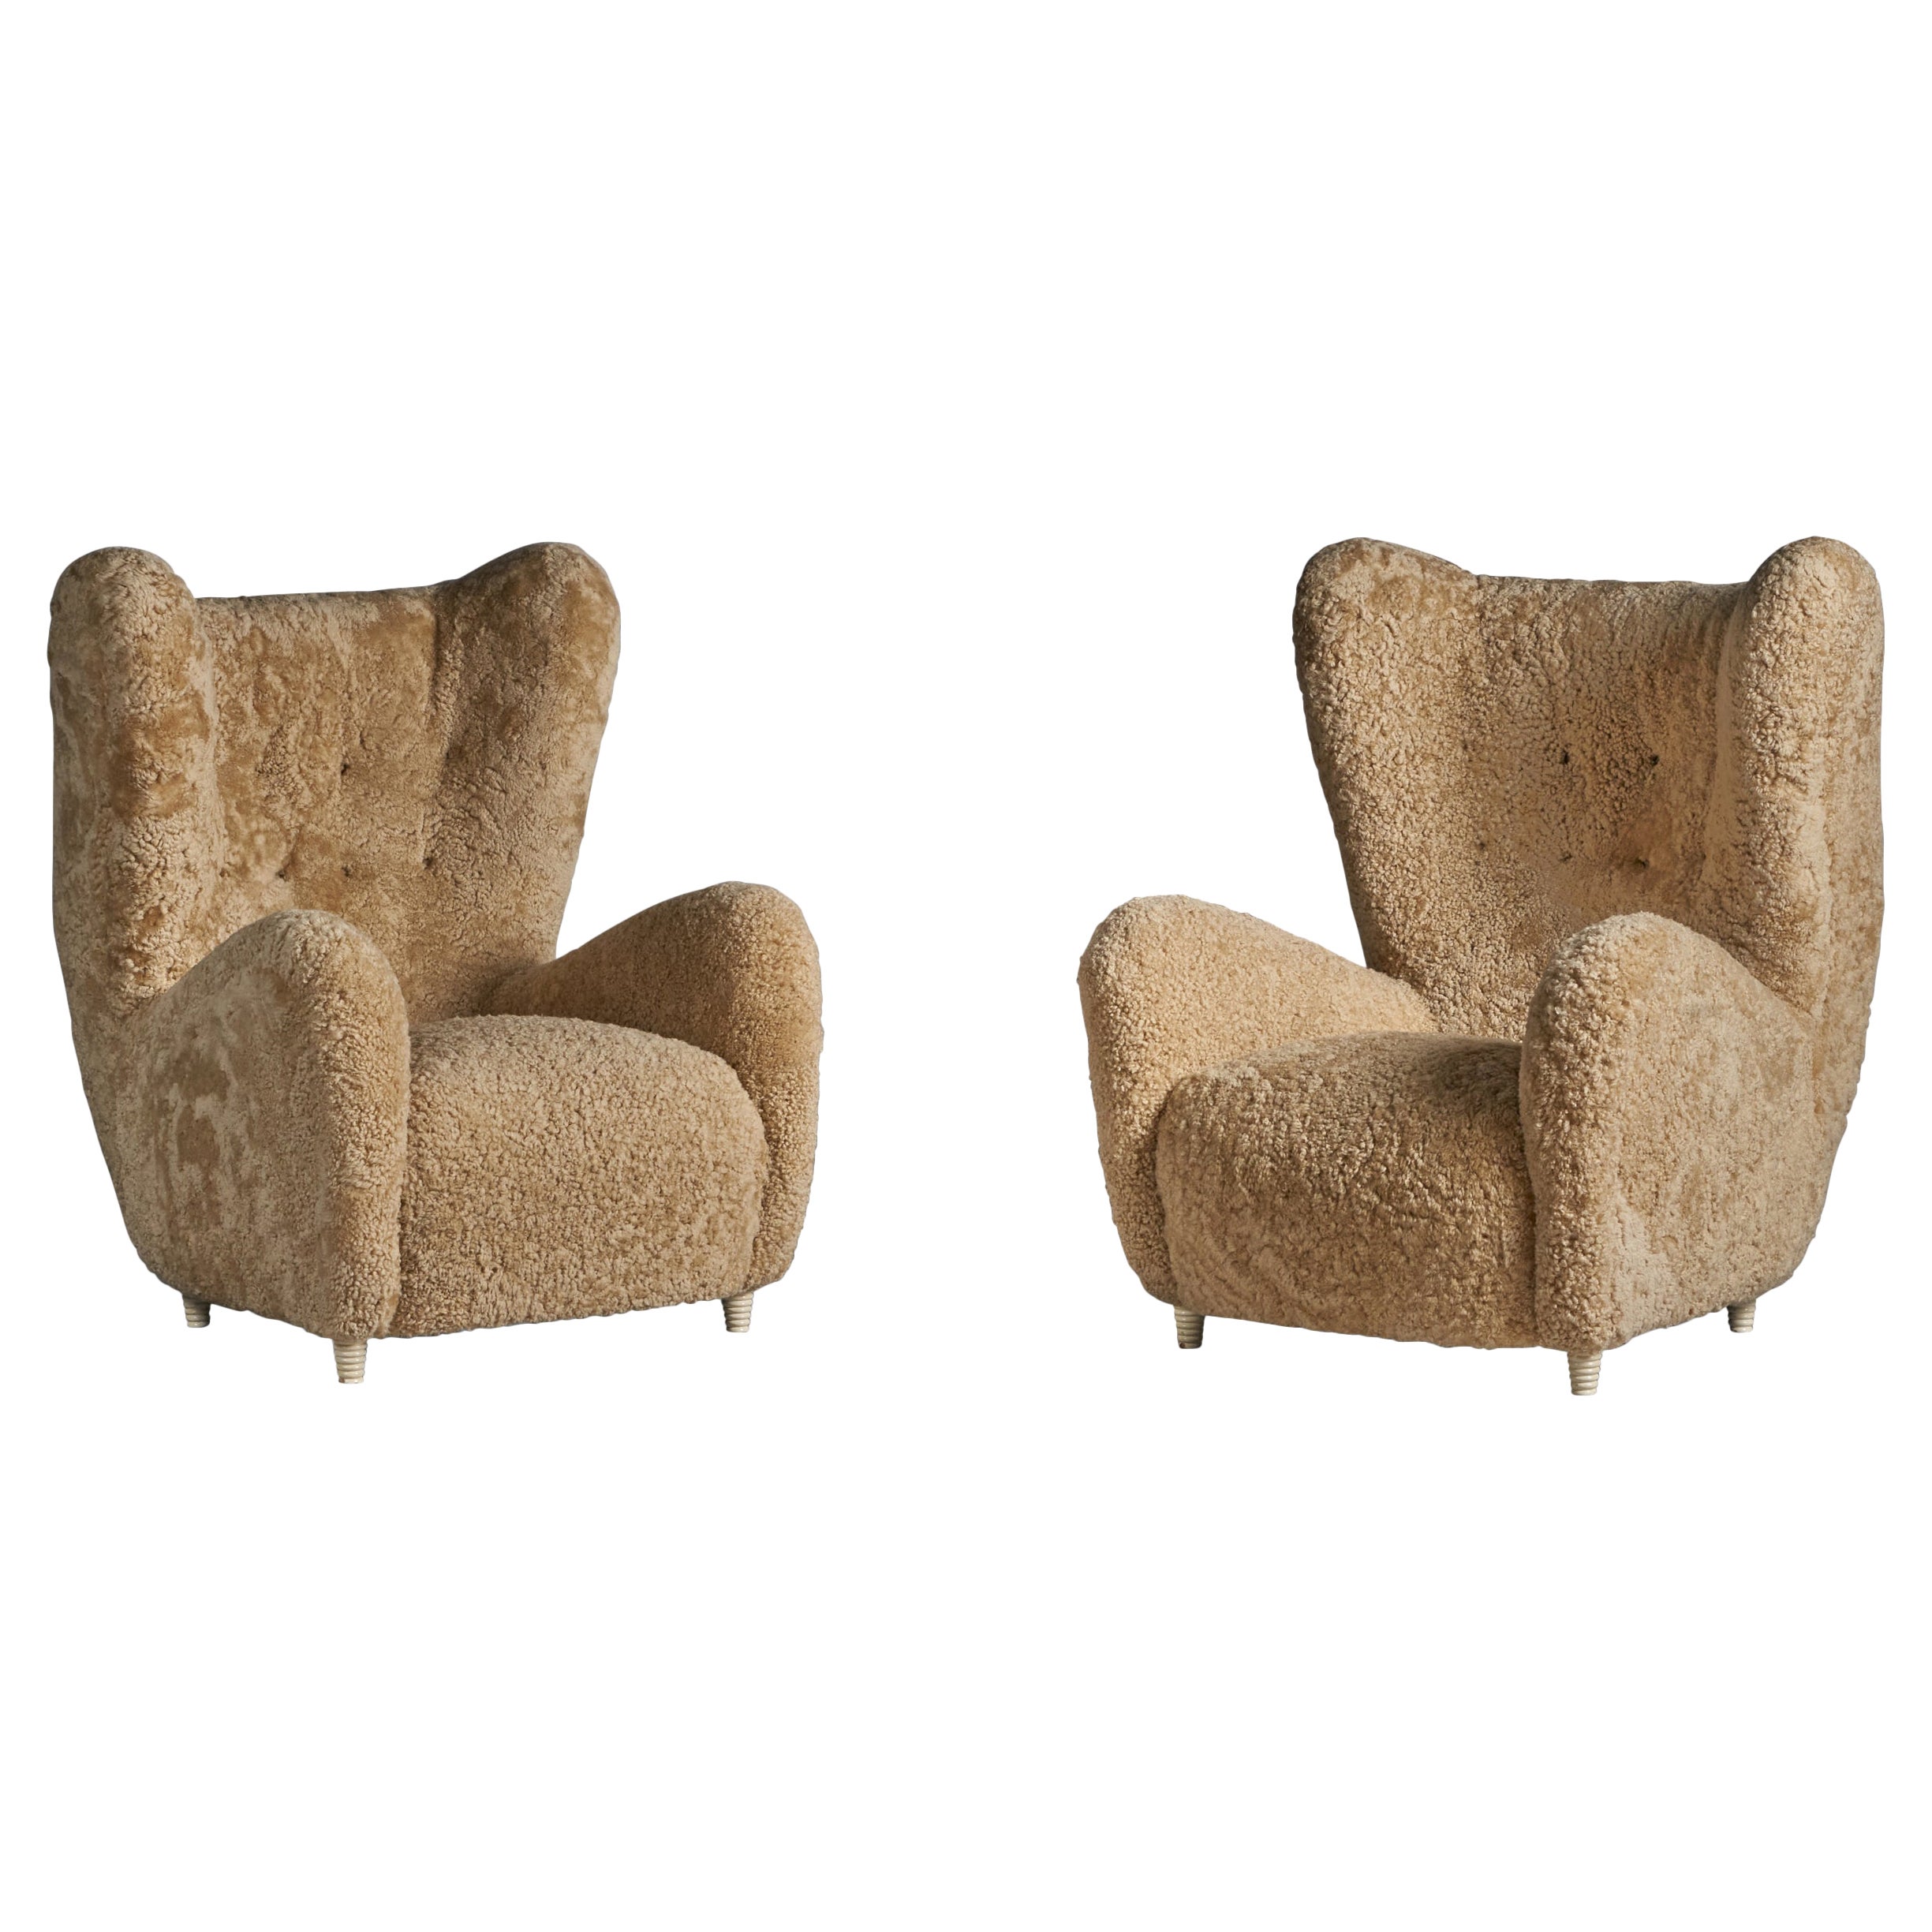 Emilio Sarrachi, Sizeable Lounge Chairs, Shearling, Wood, Italy, 1940s For Sale